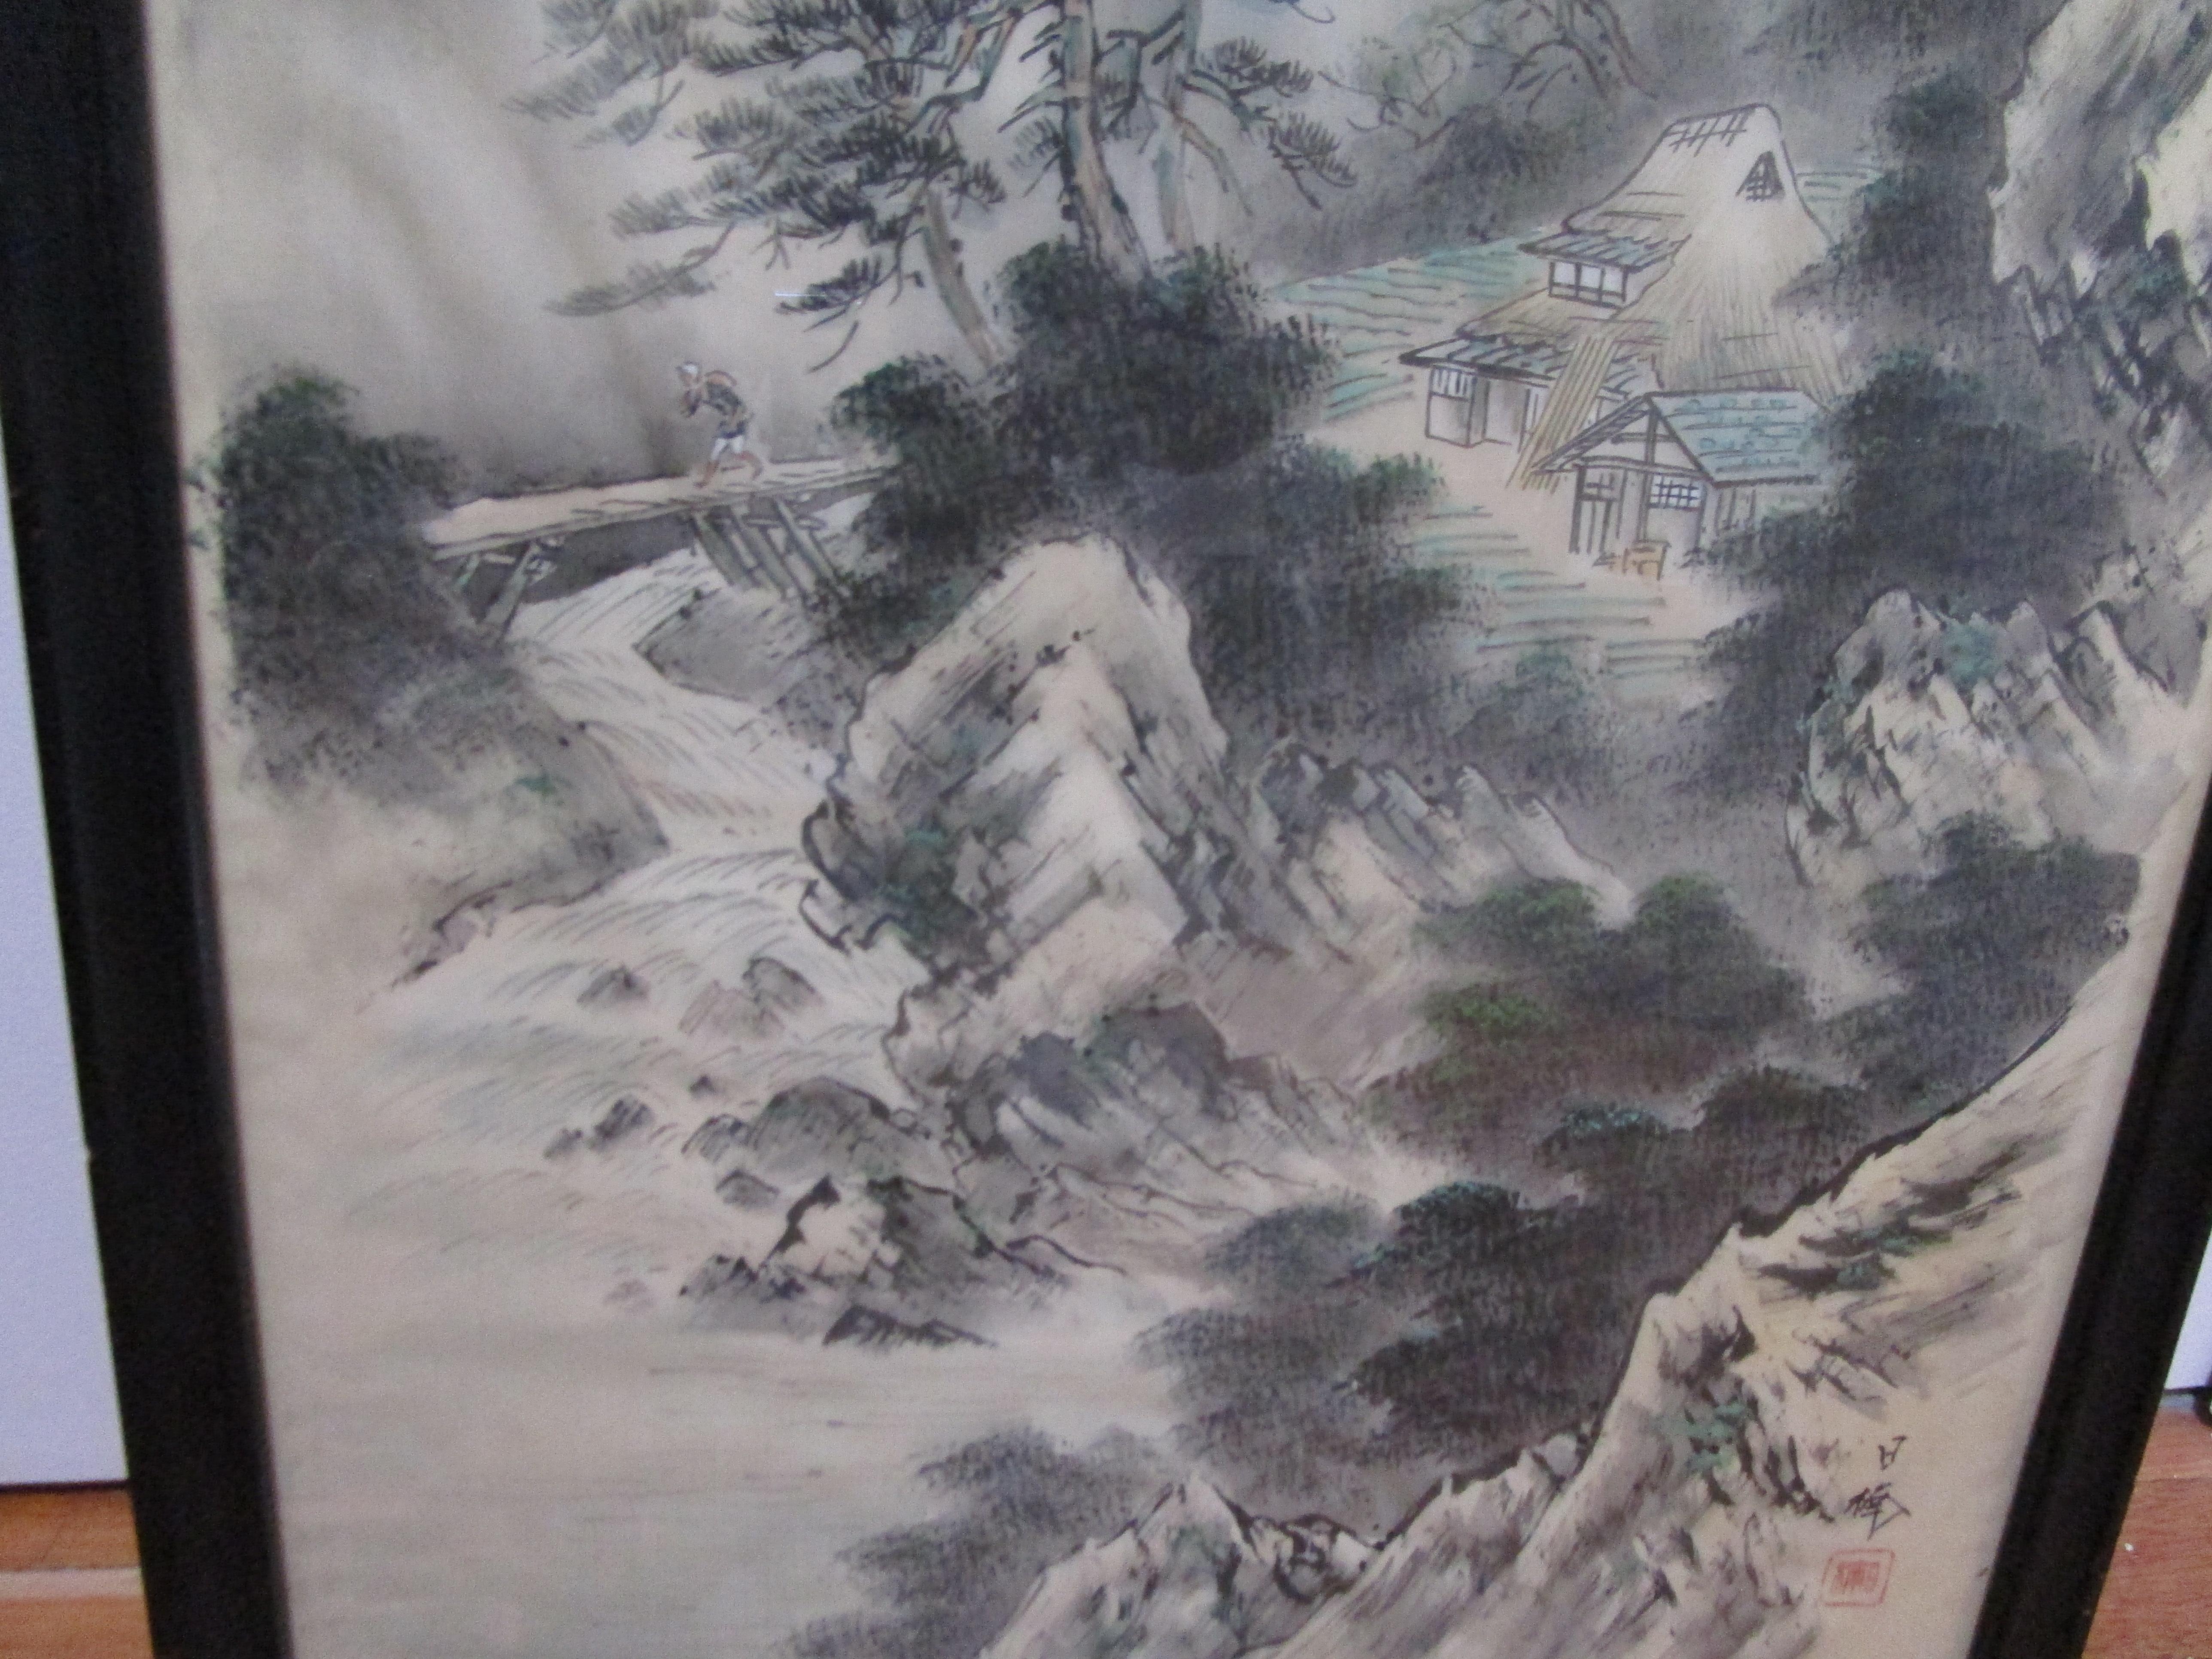 The detail of this mountainous landscape of an area that is akin to the Alps in Japan is stunning. It is a watercolor and ink depiction of Senjojiki Cirque which is at the top of the Nakagoshodani Valley, a beautiful setting.
The painting is lush,